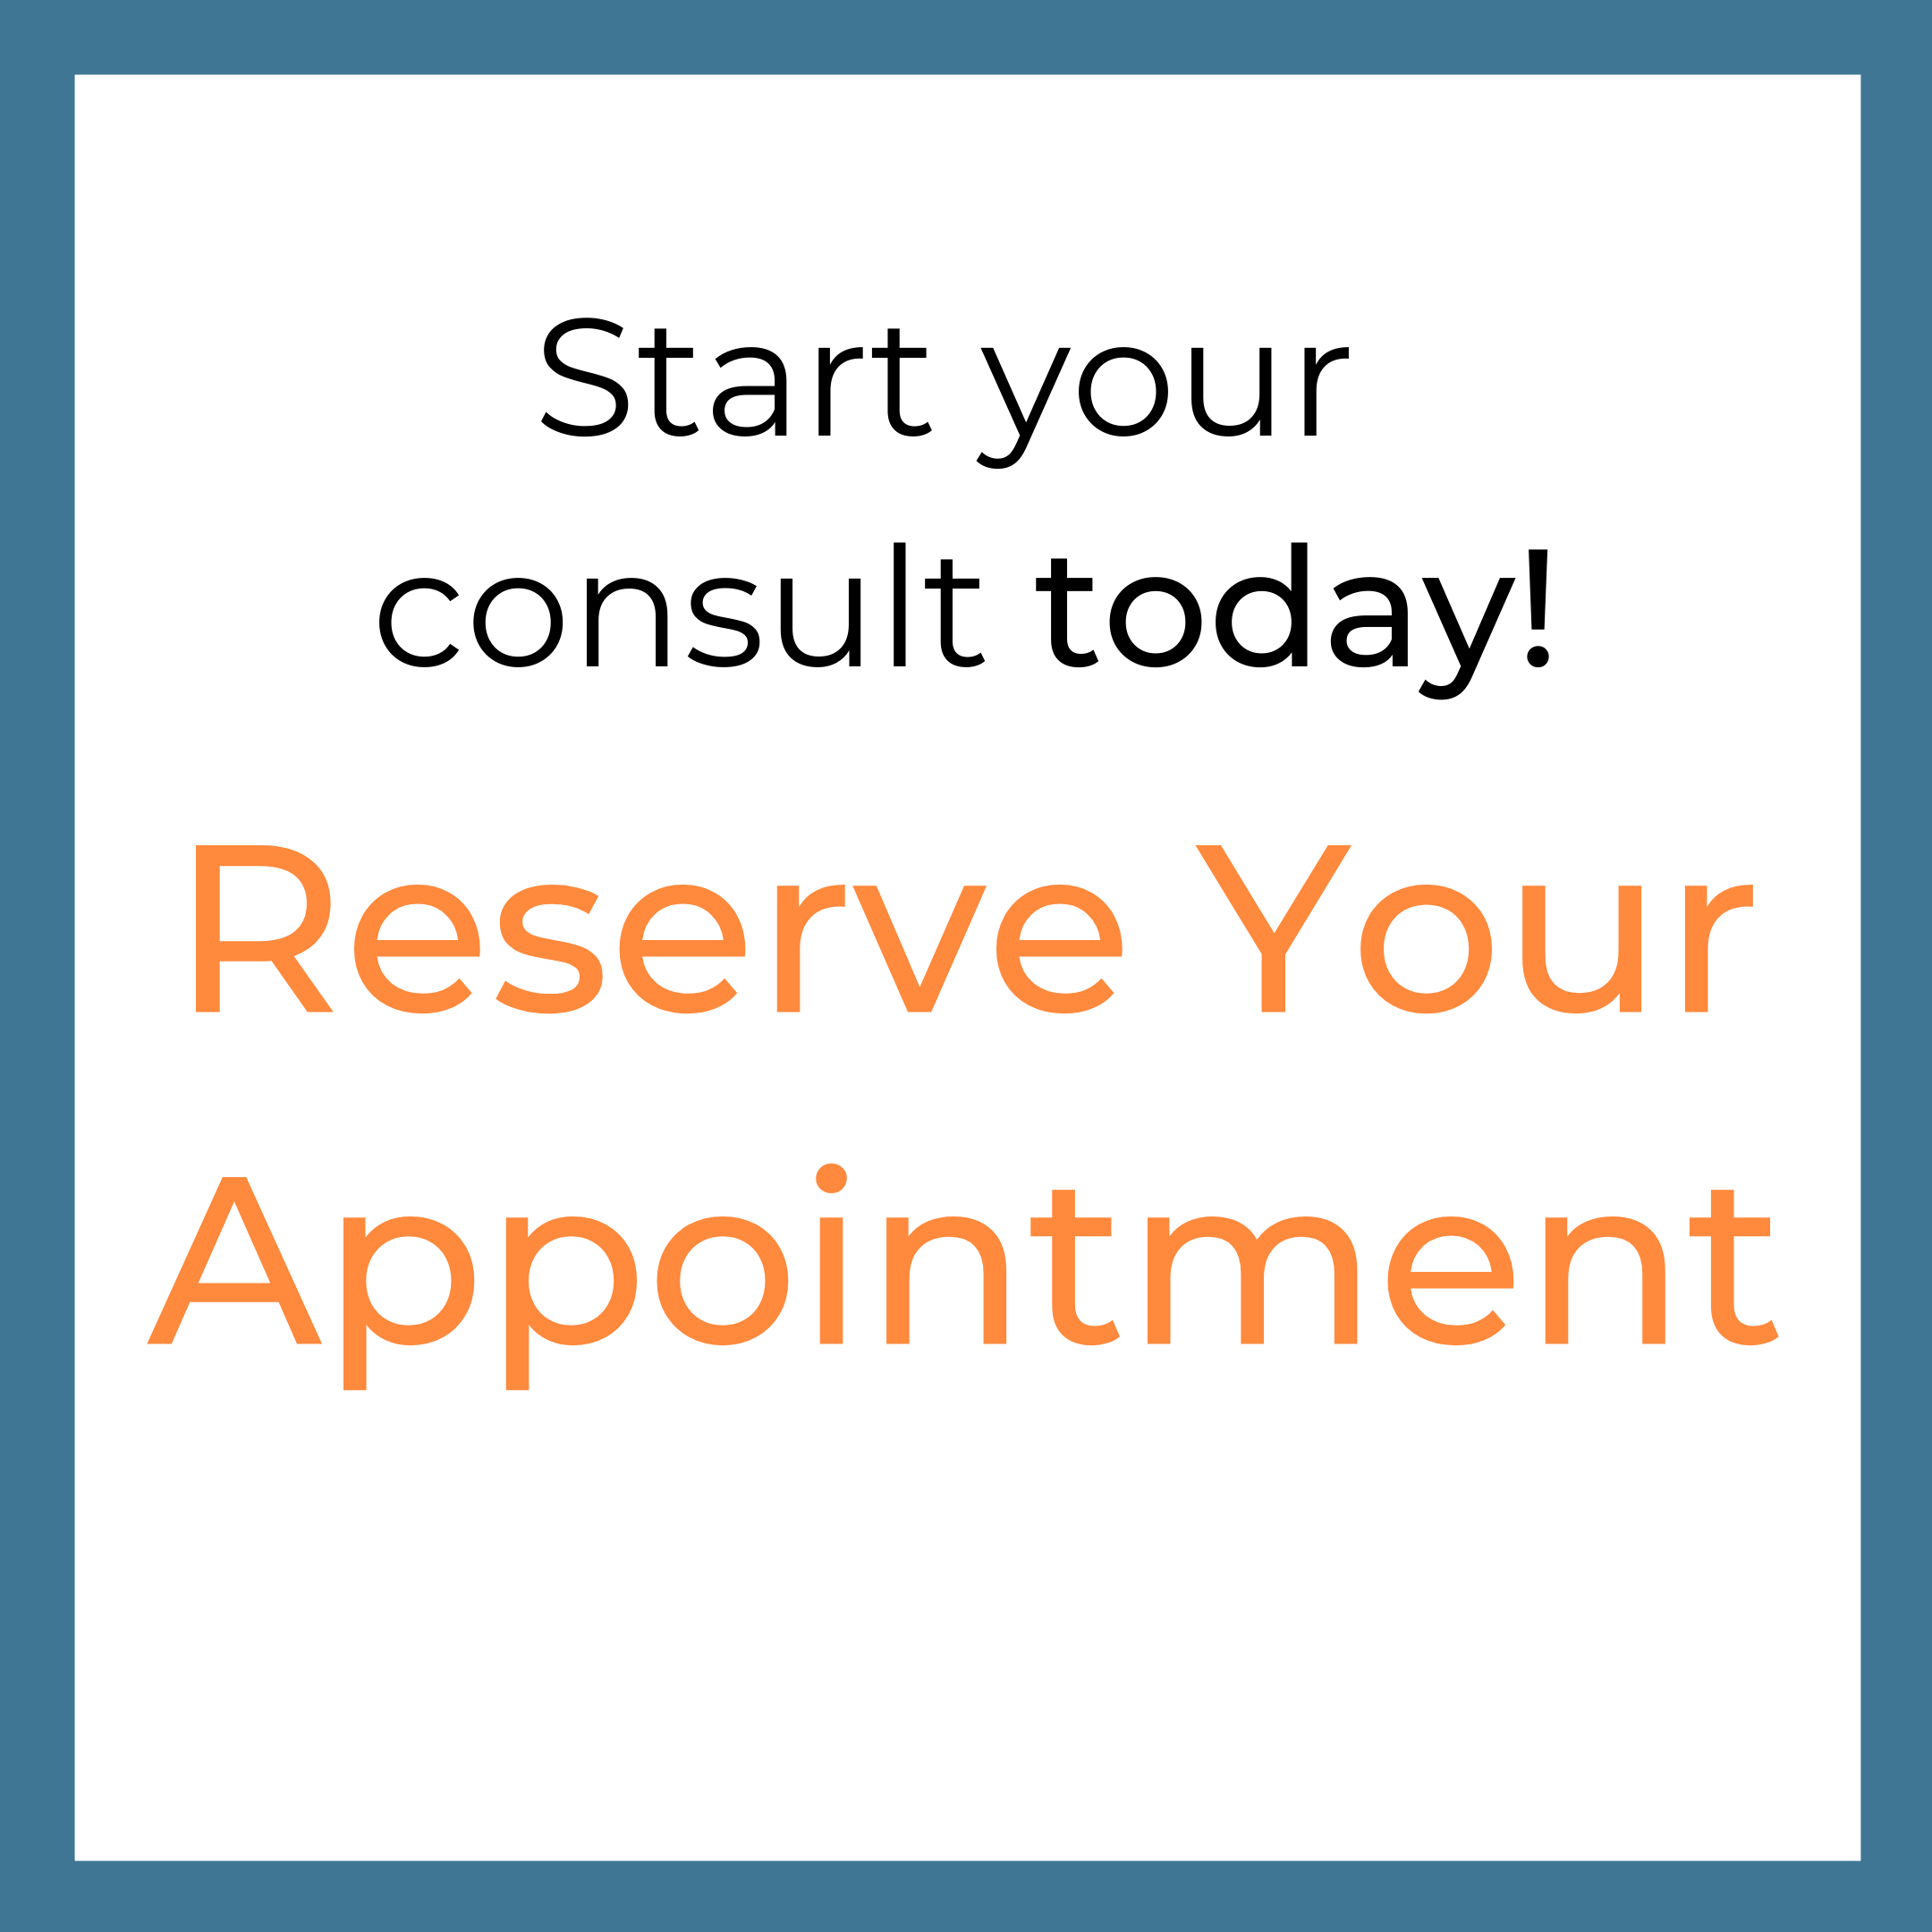 Reserve Your Appointment